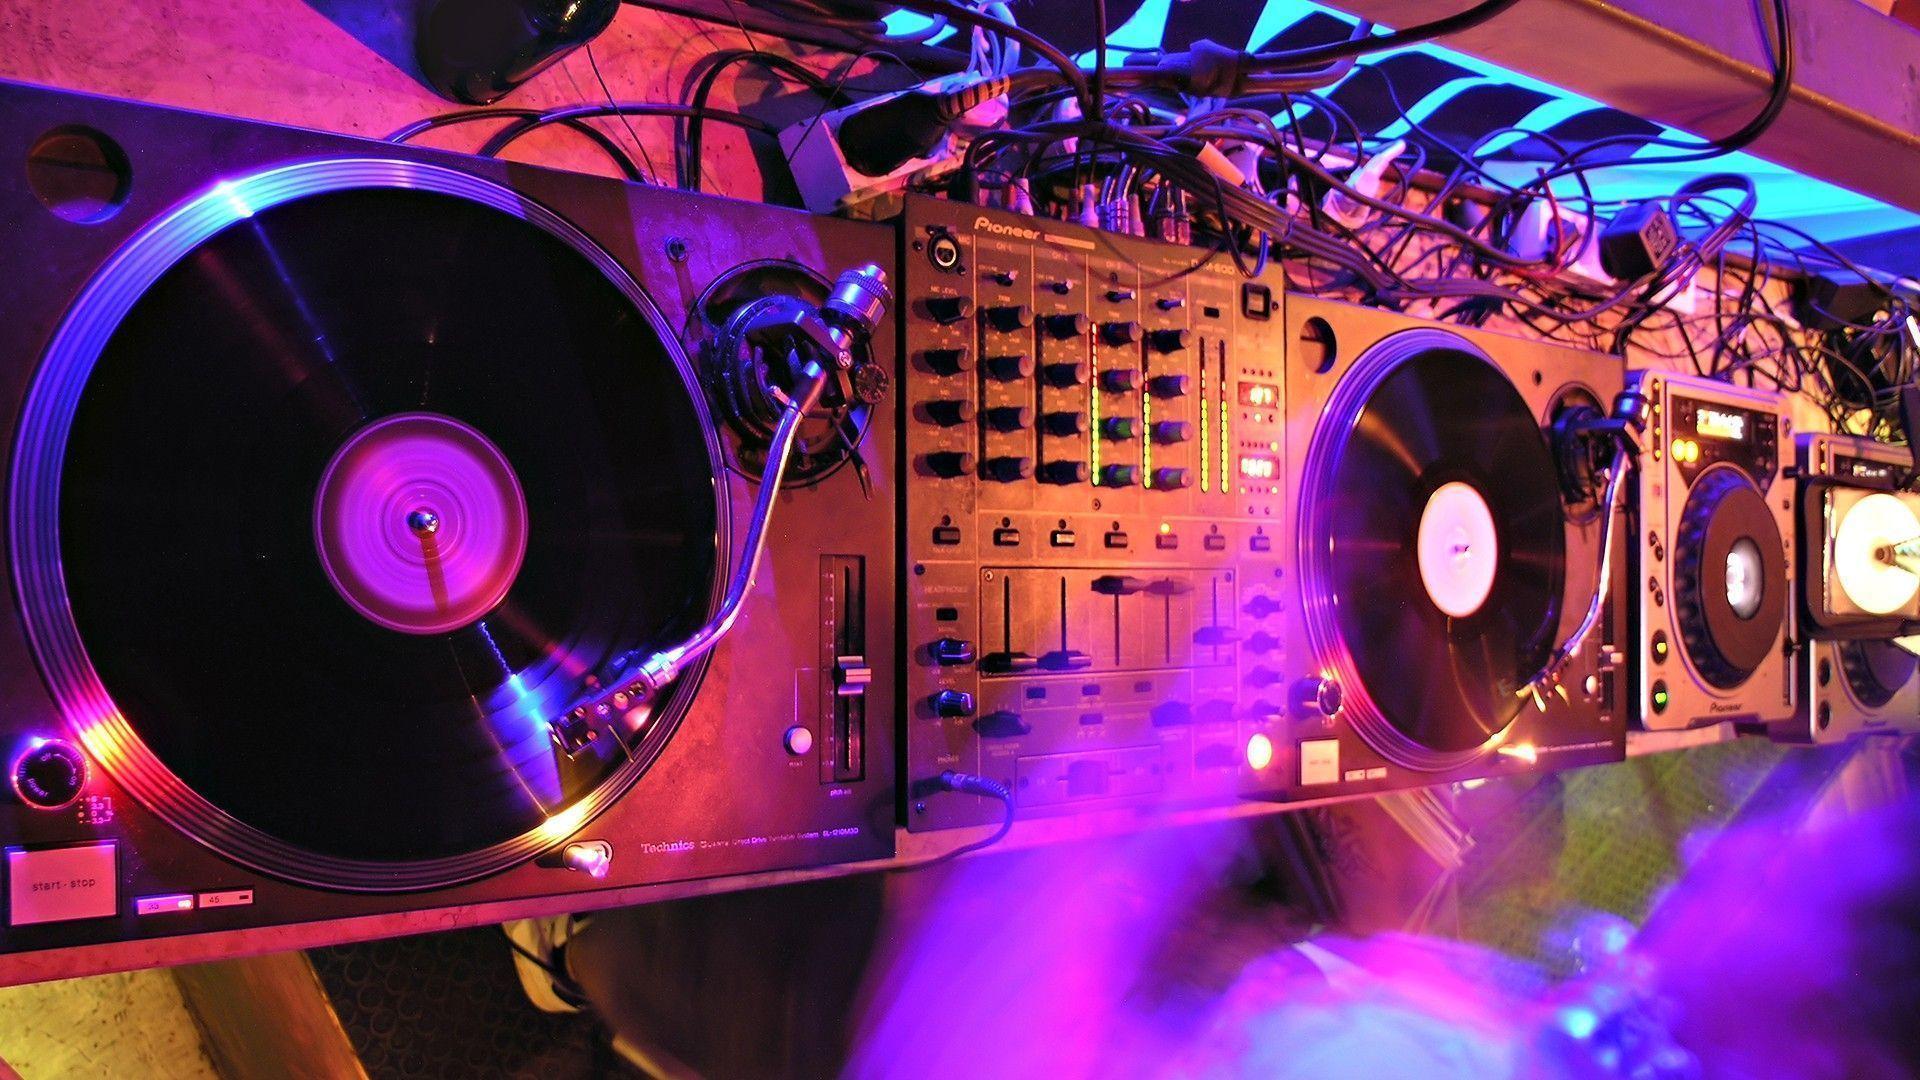 Dj Mixing Console Wallpaper 1920x1080 px Free Download